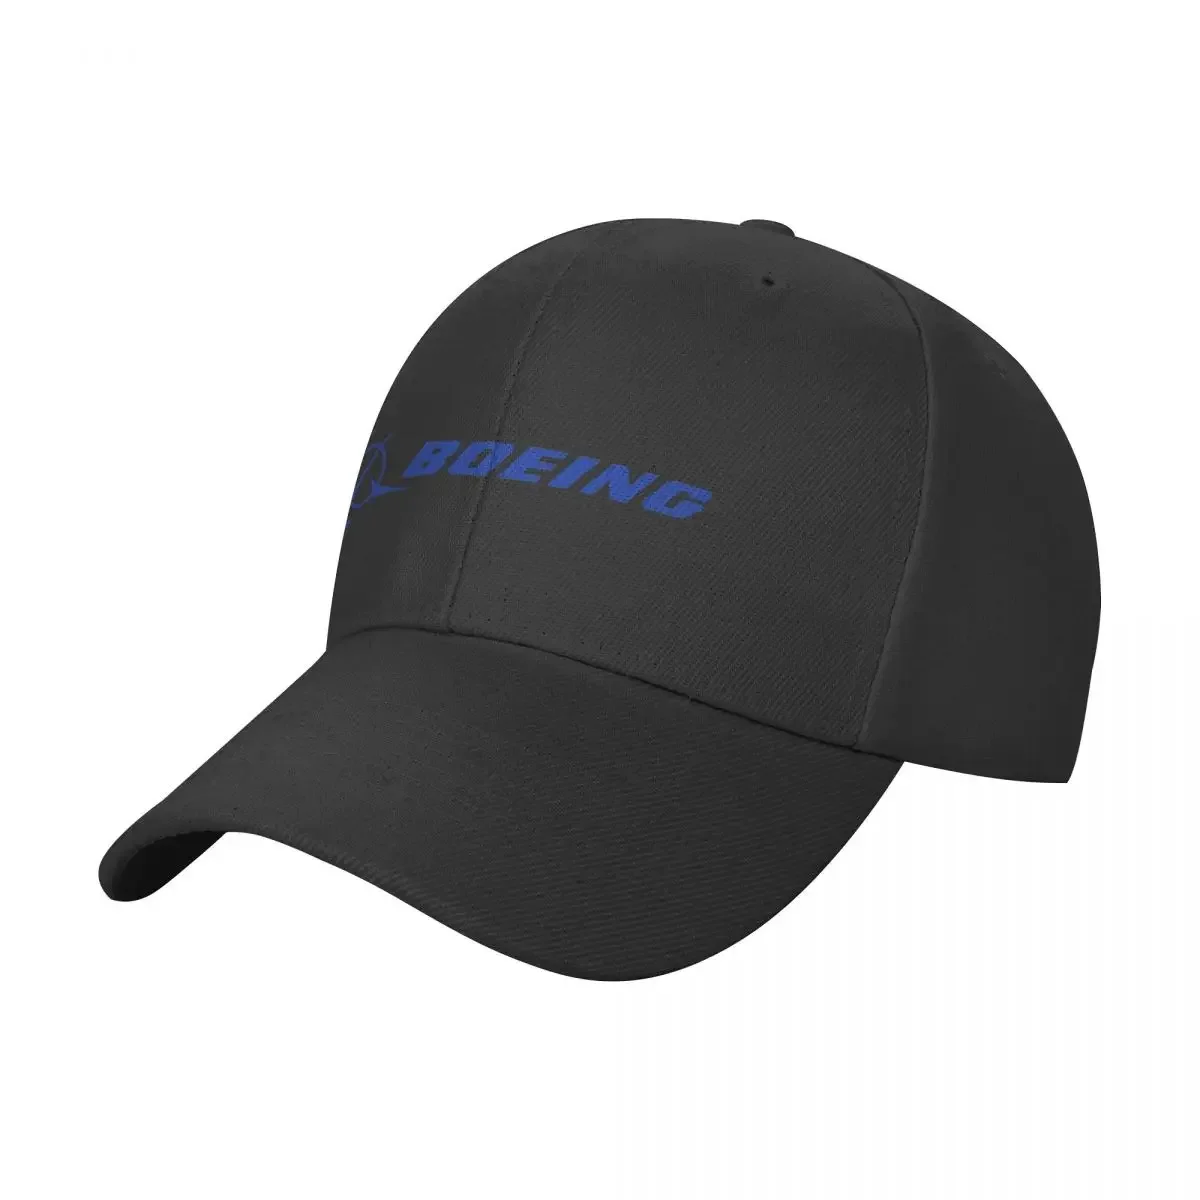 

Boeing Aircraft Jet Aviation Airplane Baseball Cap Luxury Hat New In The Hat Men Caps Women's